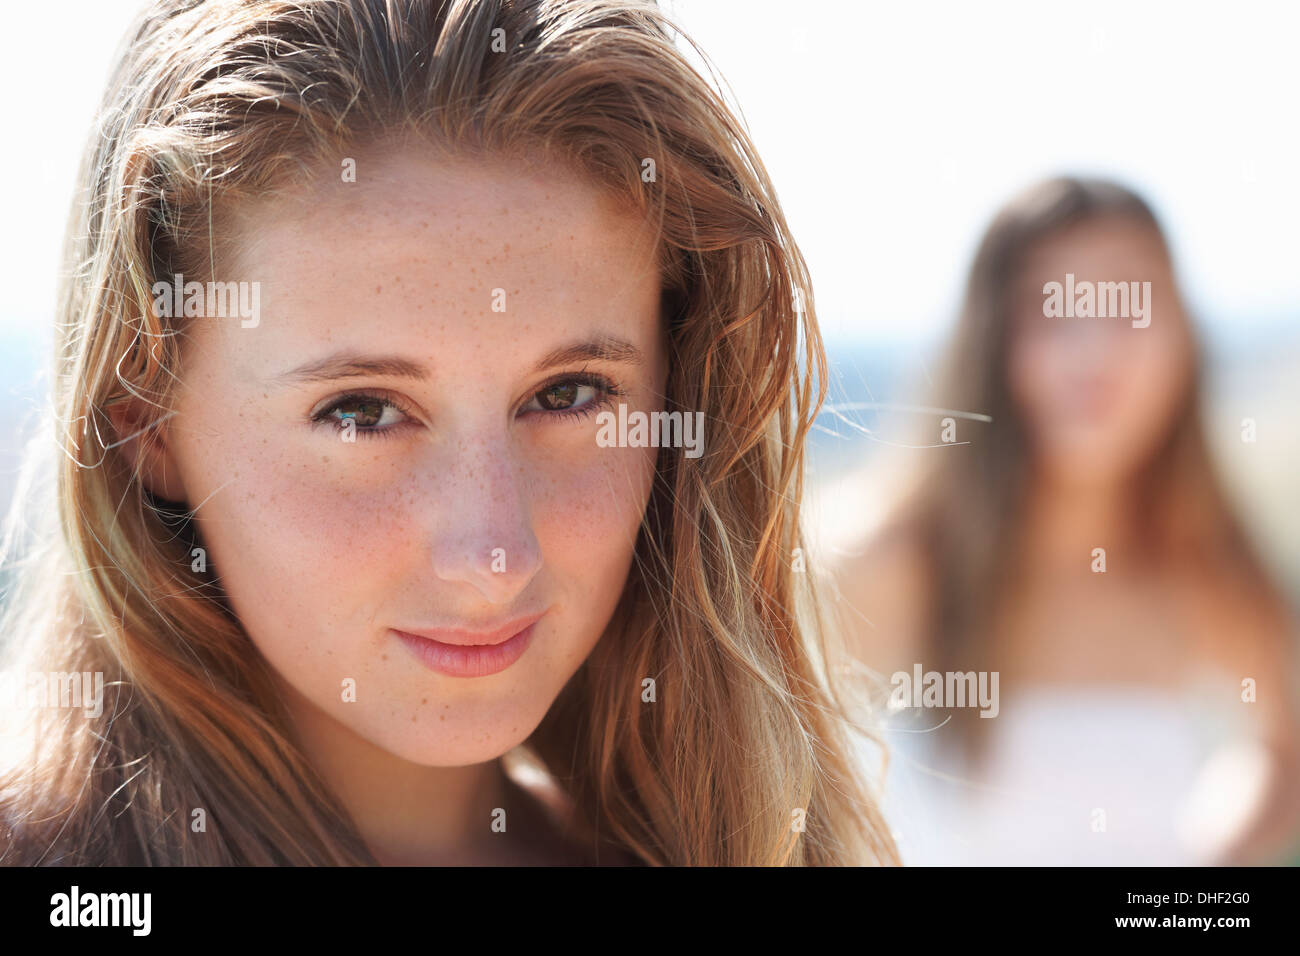 Portrait of teenage girl, focus on foreground Stock Photo